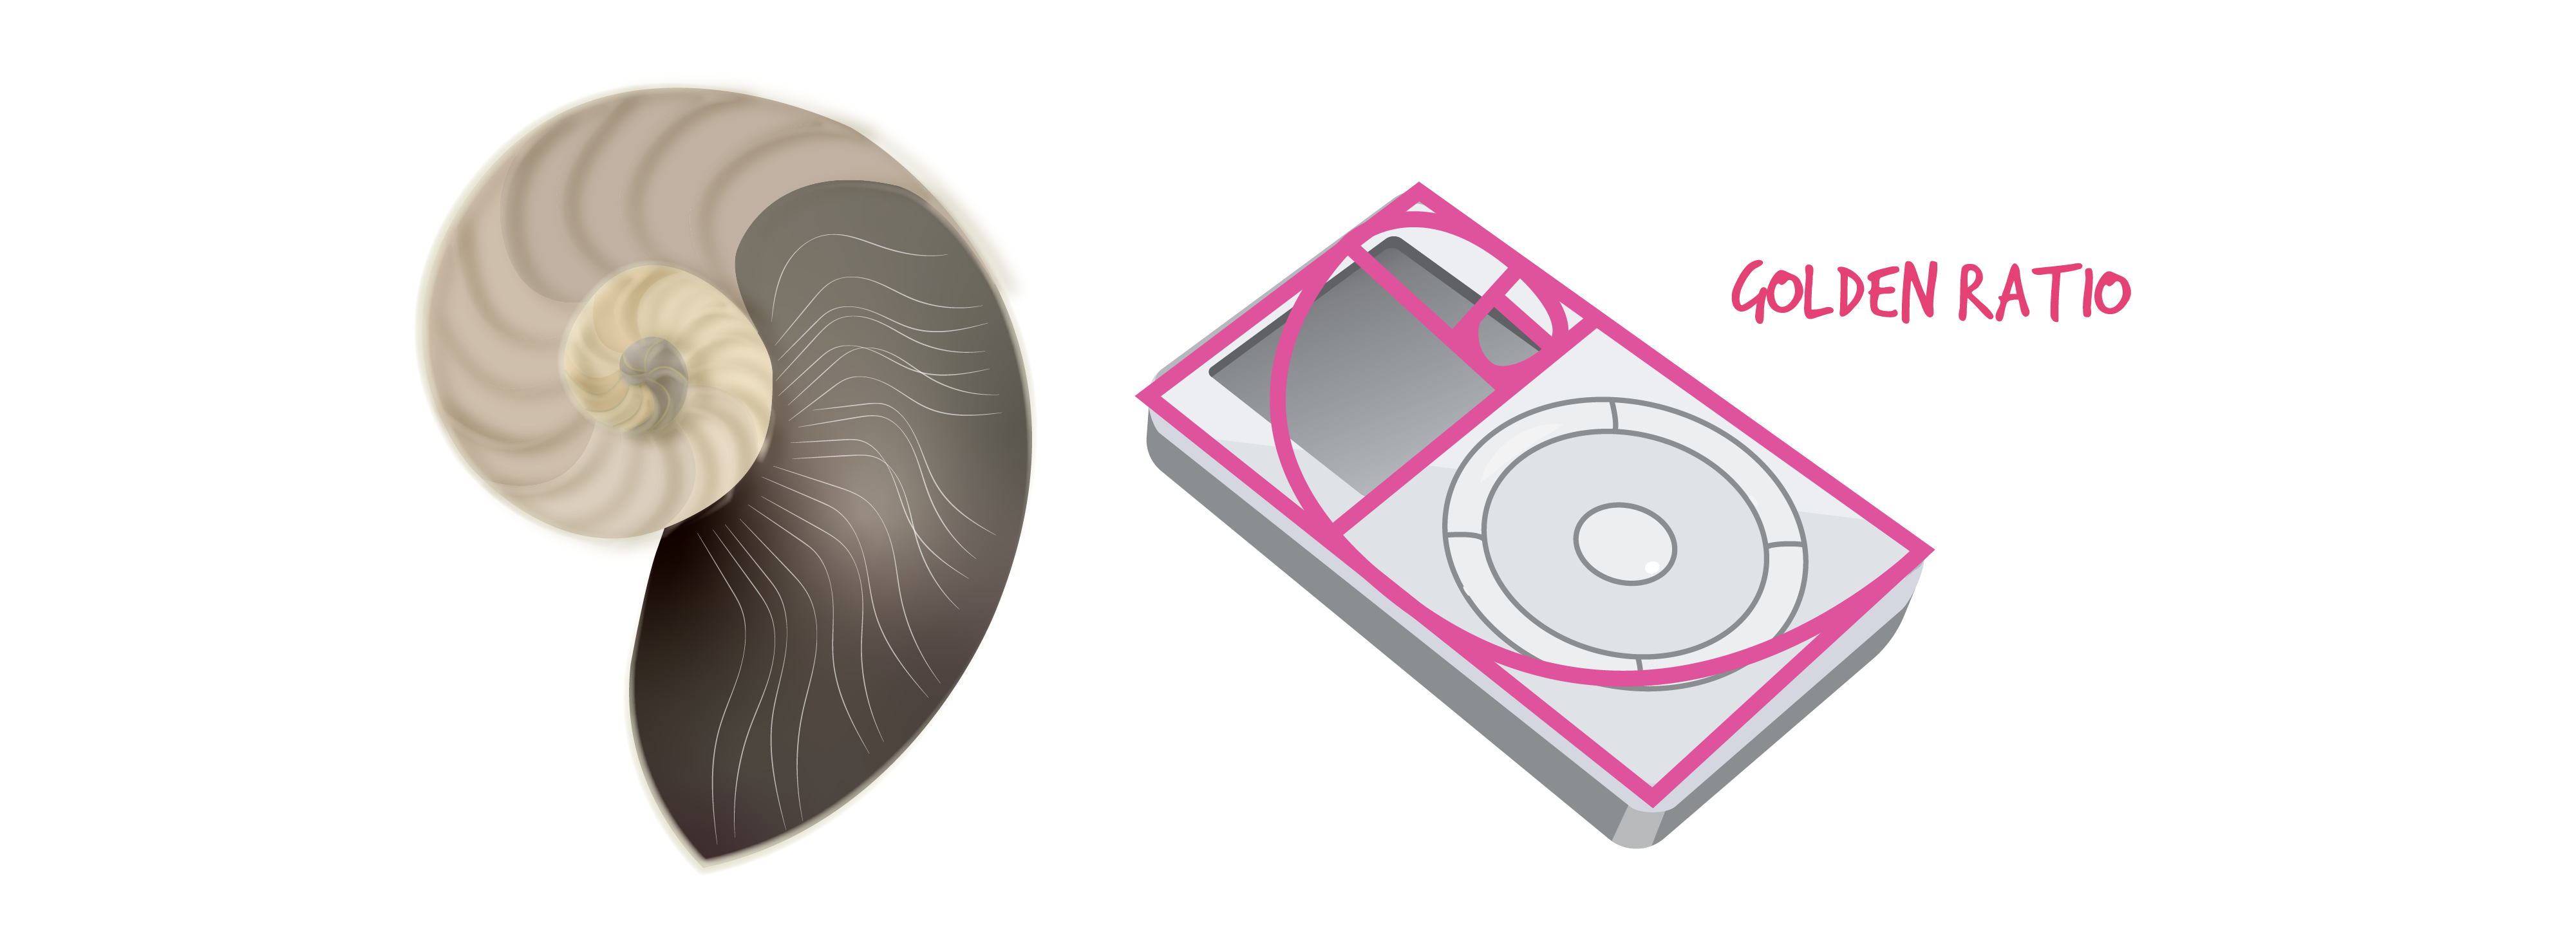 On the left is a beige and grey, rounded shell in a similar form to the Golden Ratio. On the right is a grey music player with the outline of the shell on the left placed on top of it to illustrate the proportional segments, similar to those of the Golden Ratio.